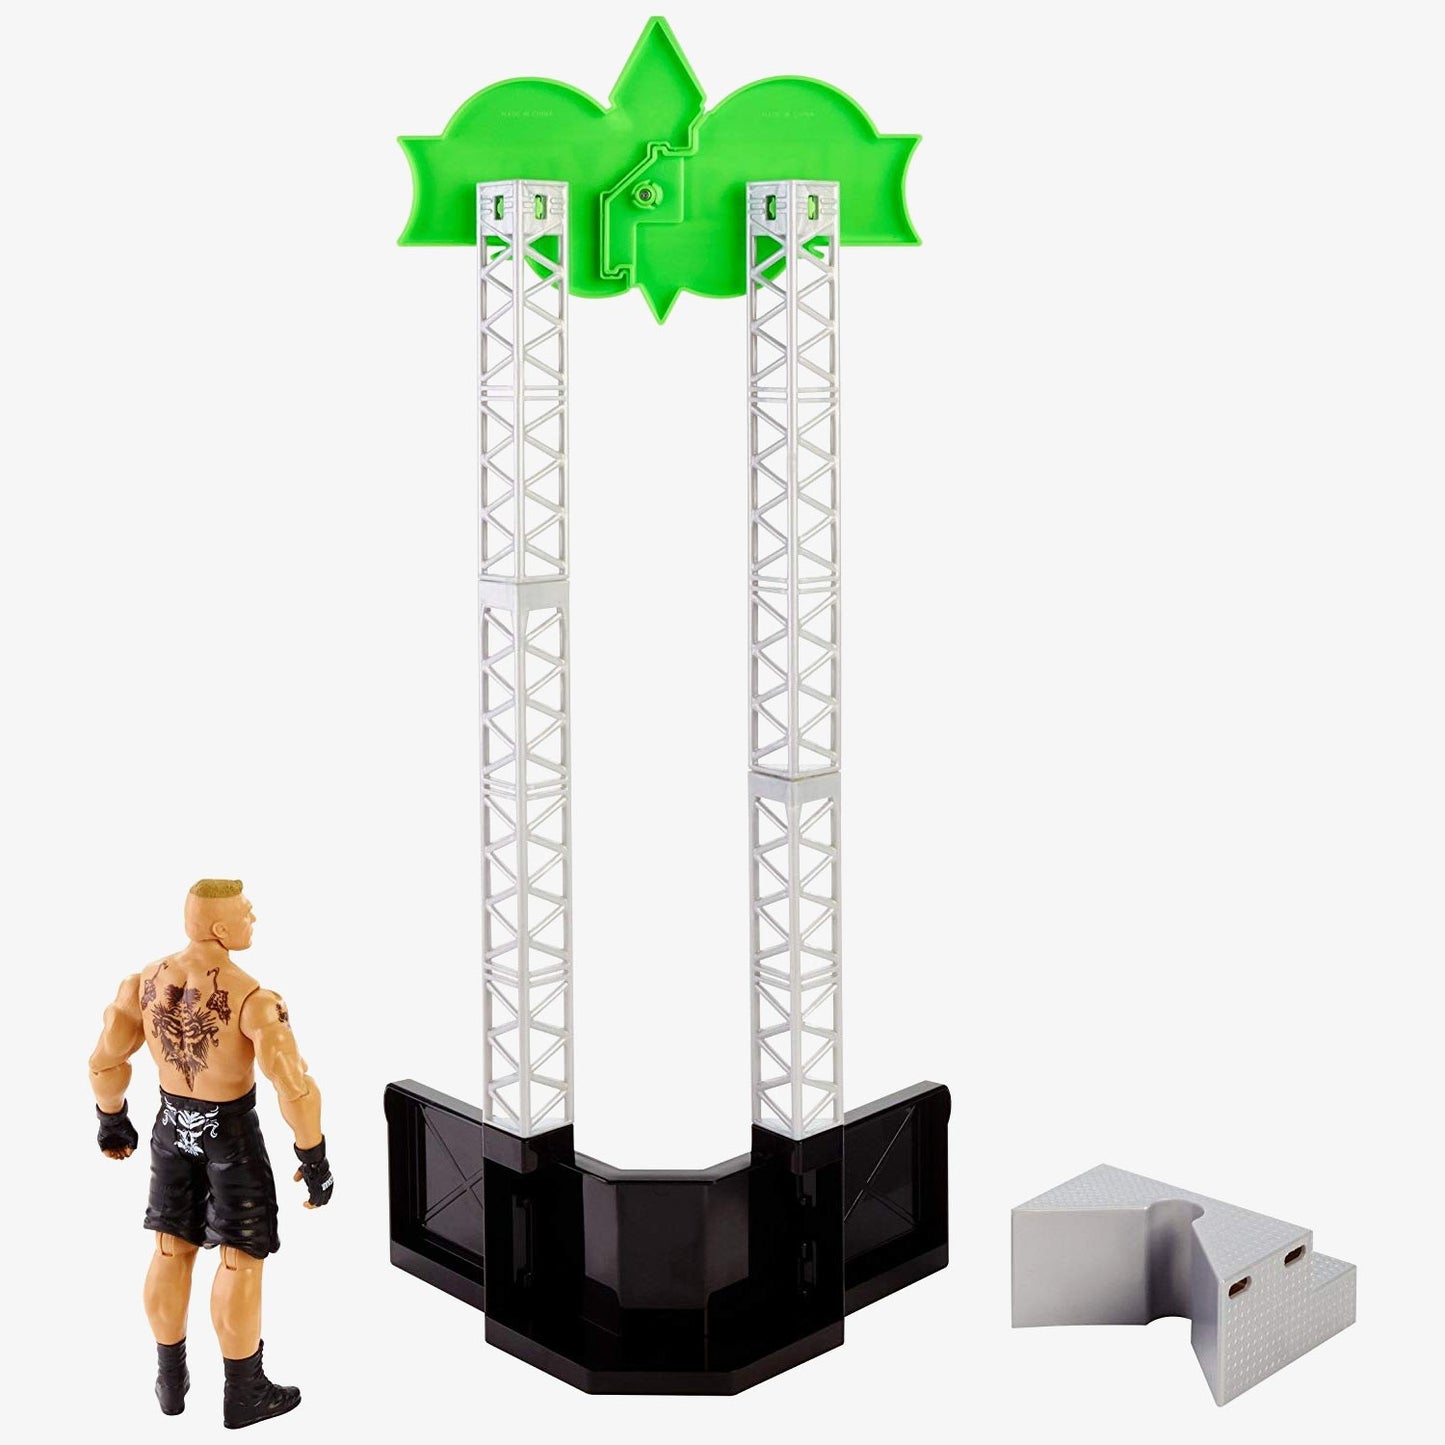 WWE Road to WrestleMania Playset (with Brock Lesnar)